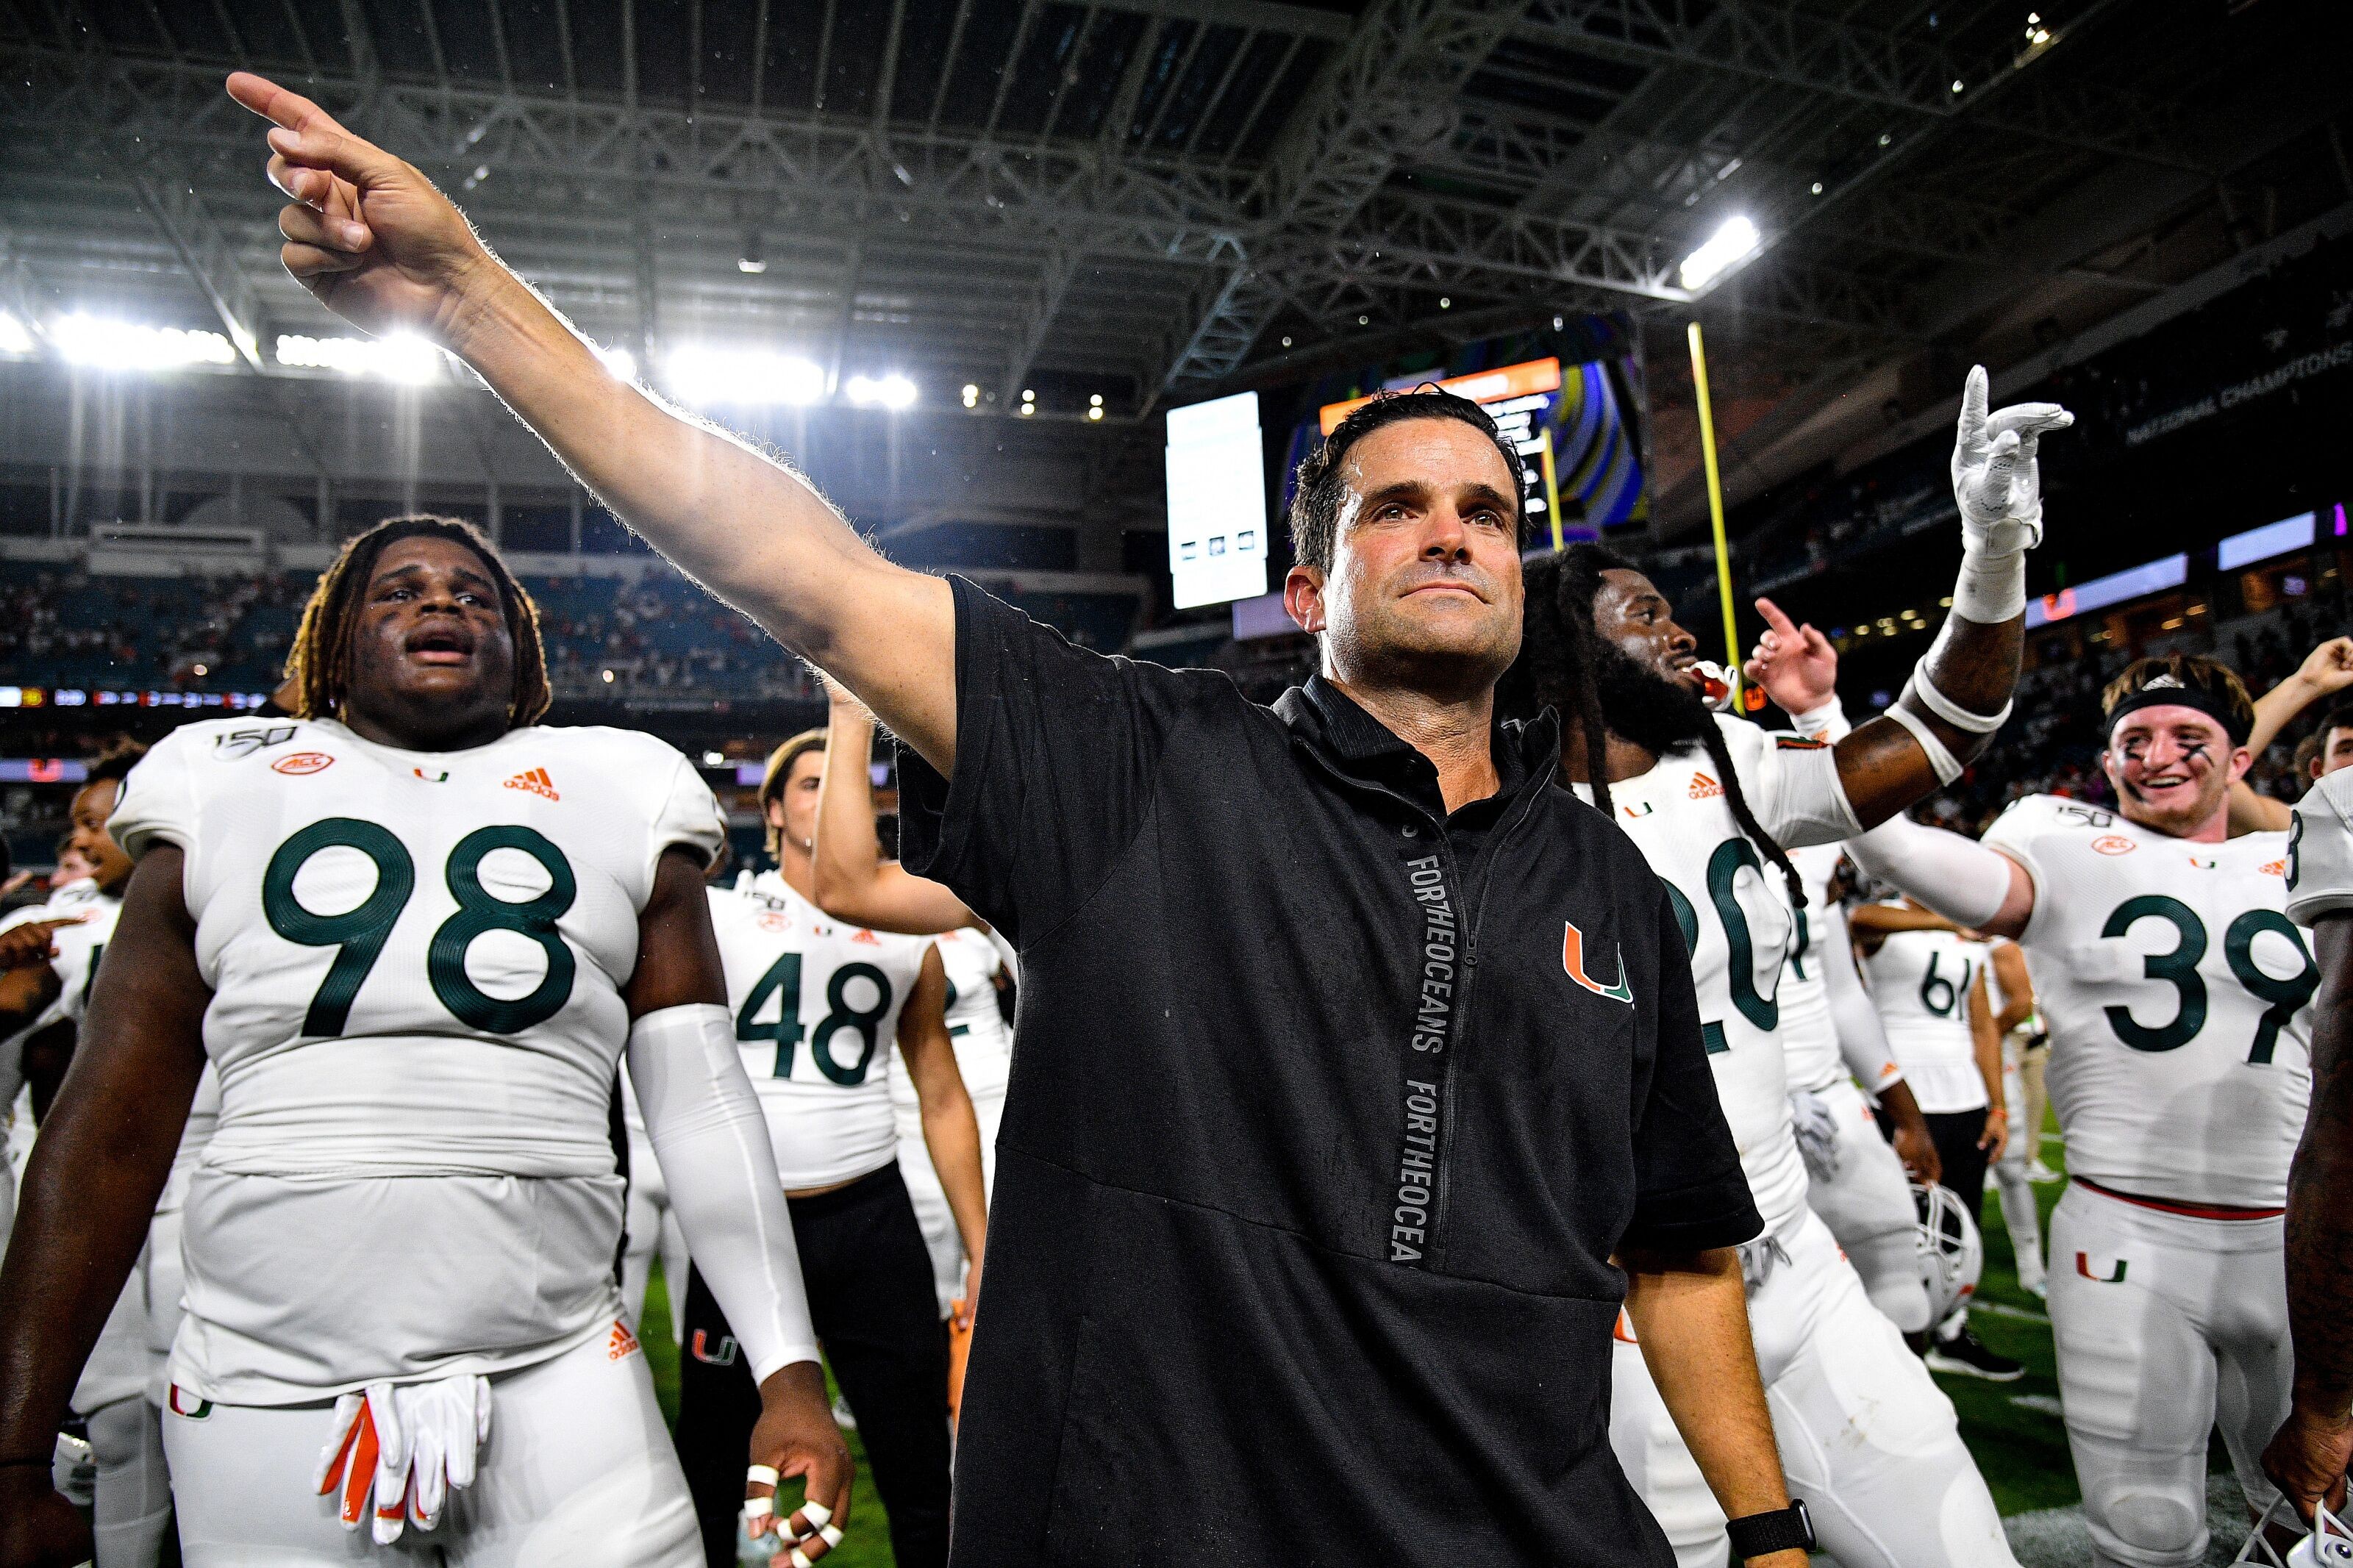 Miami football 2020 schedule: one bye, no 2019 top 25, eight straight